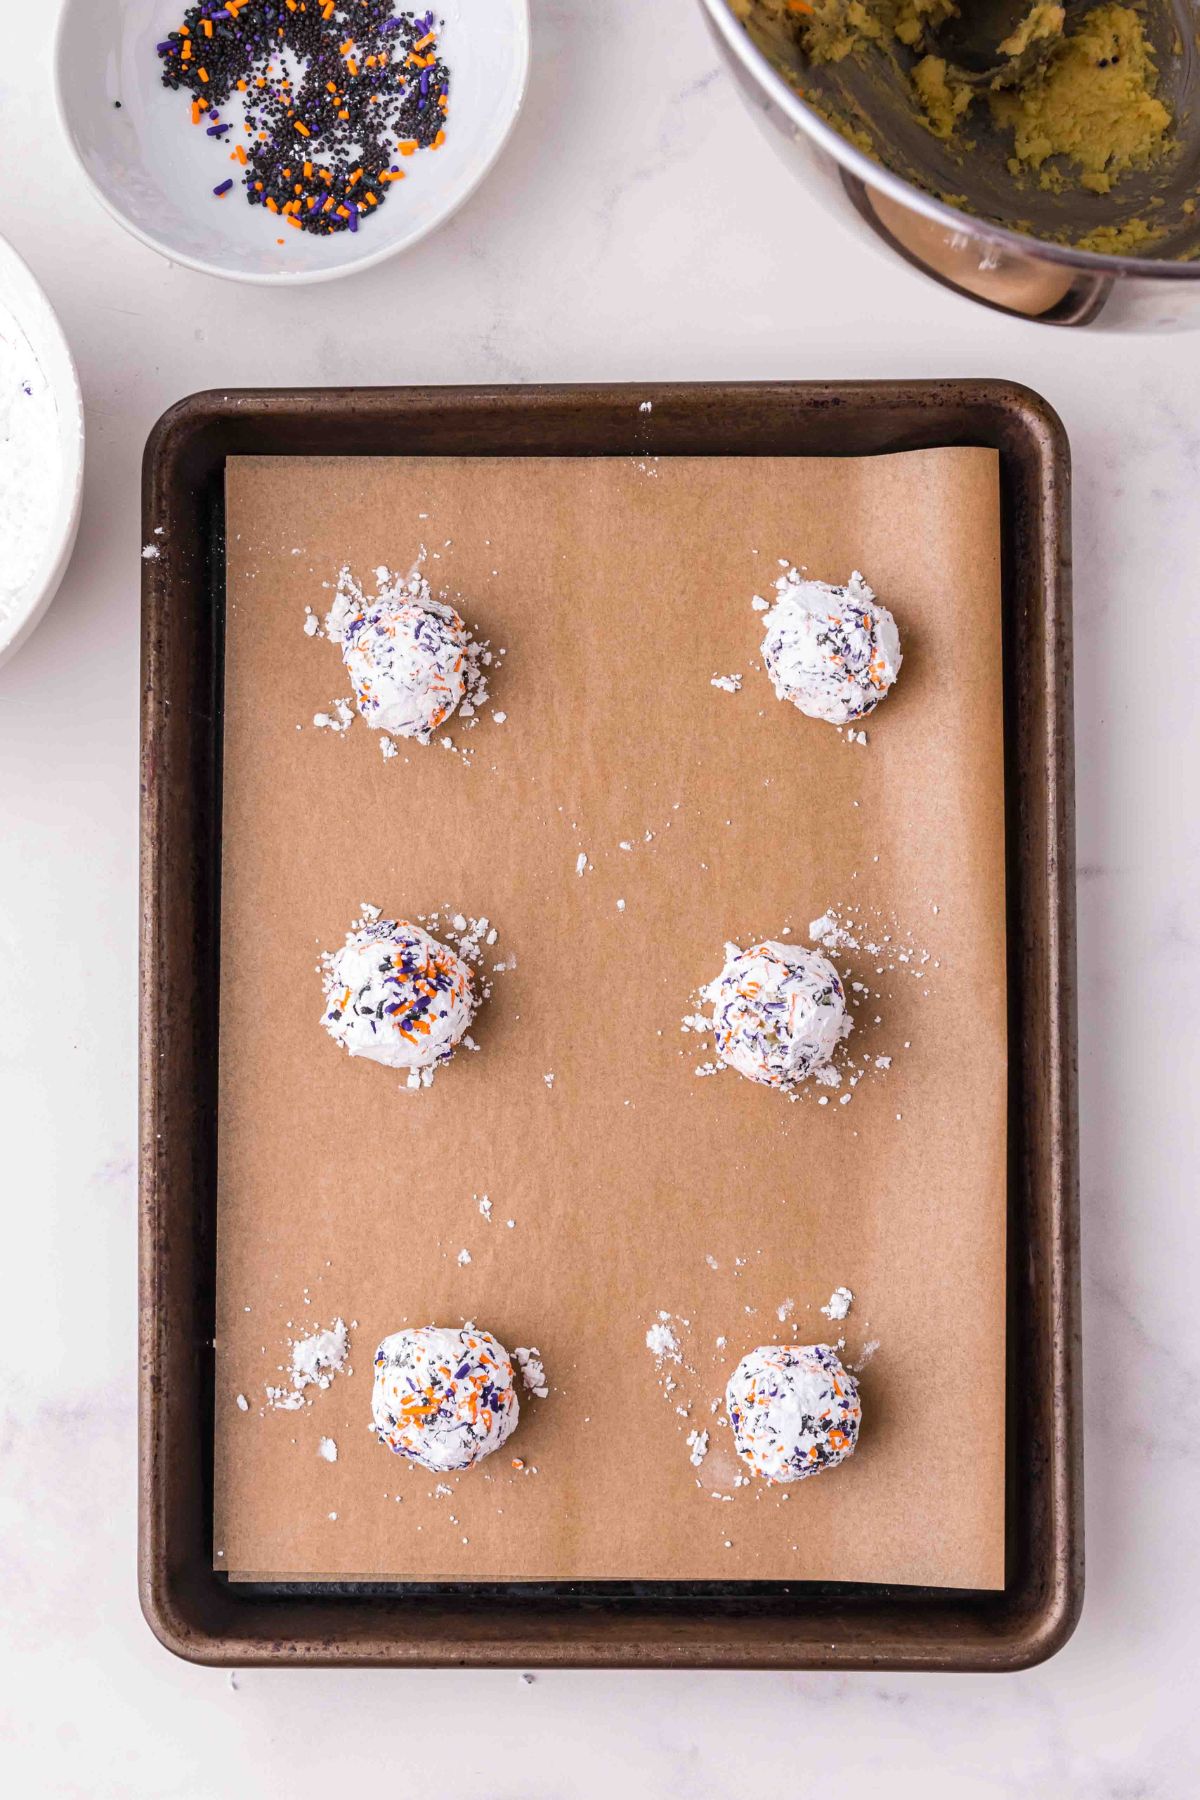 6 white balls on baking sheet with parchment